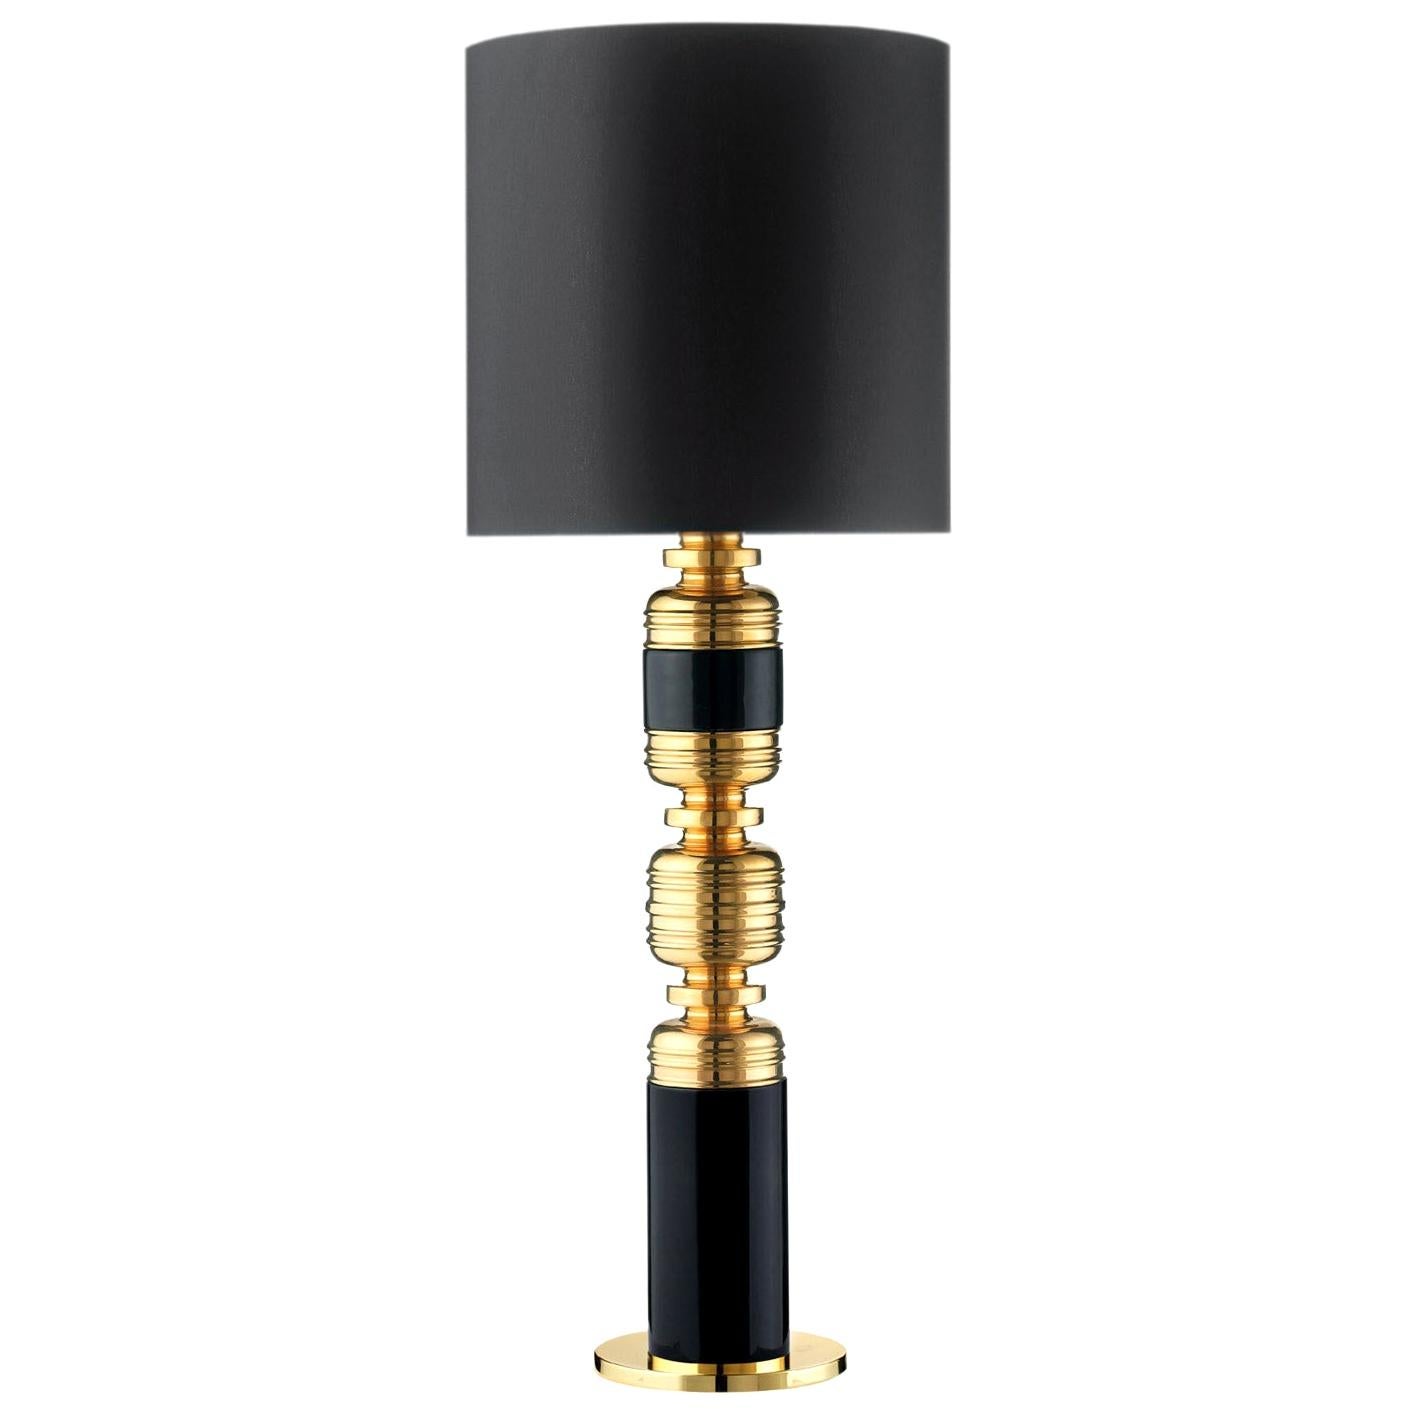 Ceramic Lamp "THEA 4" Handcrafted in 24-Karat Gold and Black by Gabriella B.